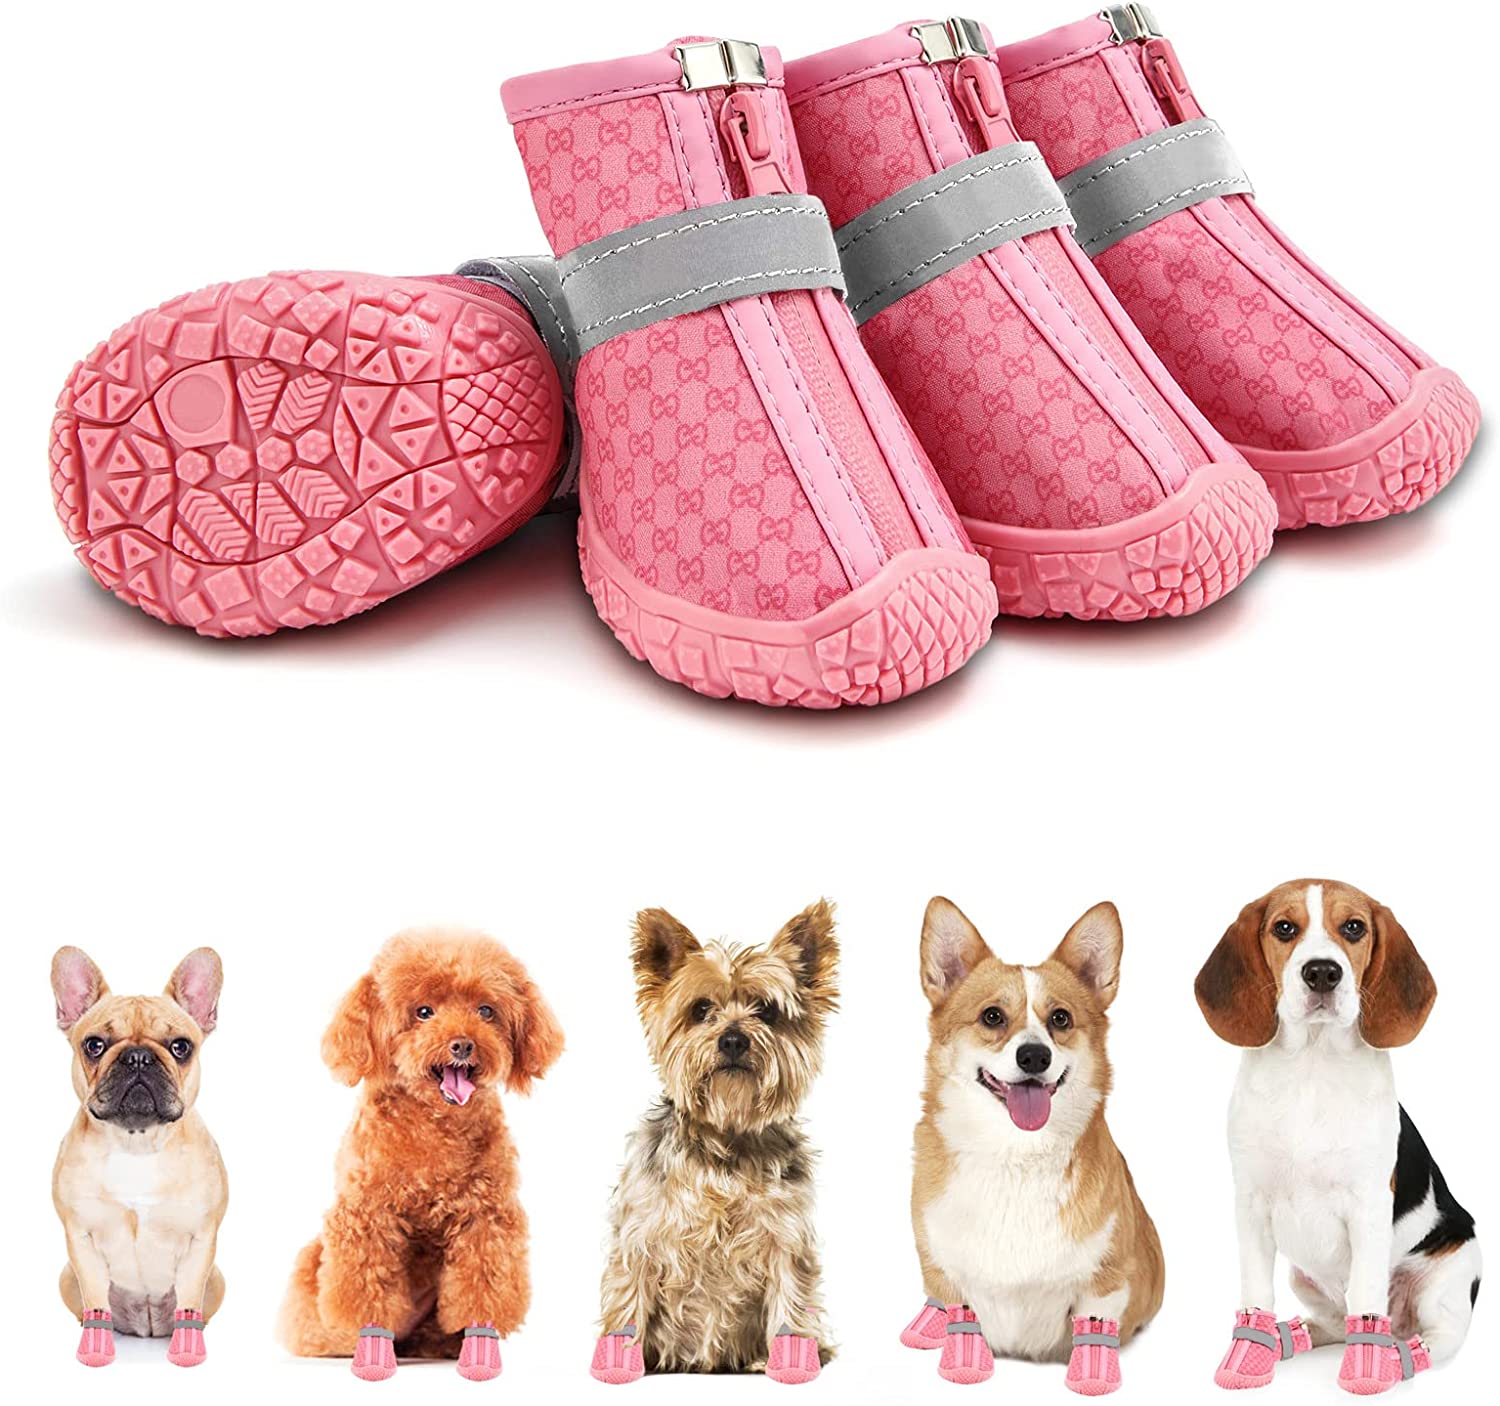 JZXOIVA Zipper Design & Suede Lining Dog Boots